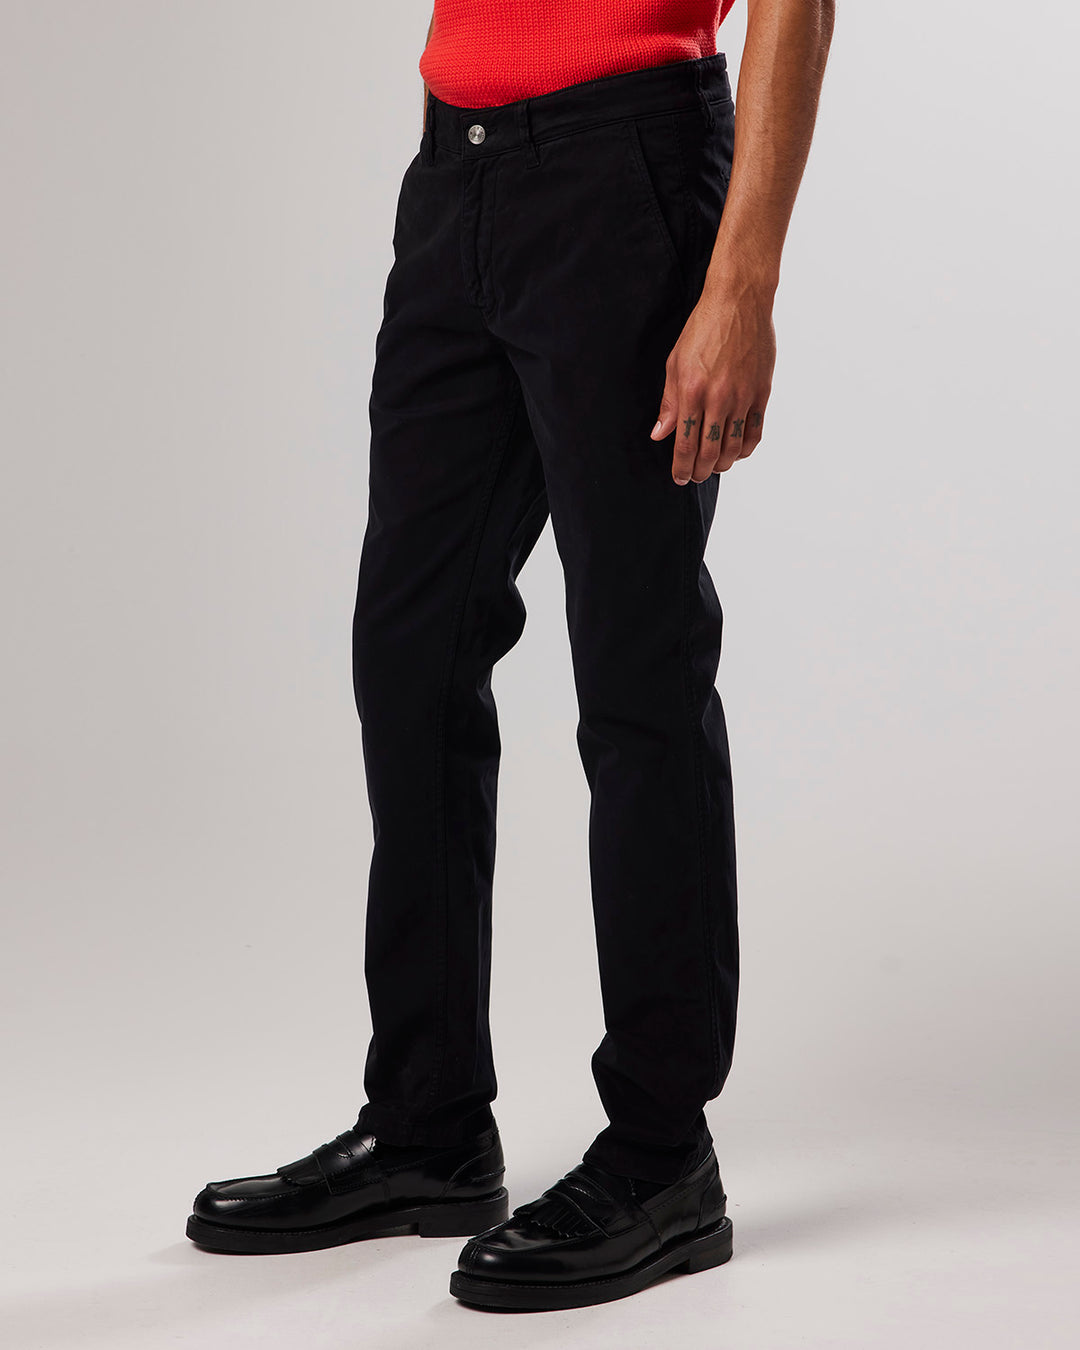 NN07 - Marco 1400 Classic Chino in Black | Buster McGee Daylesford